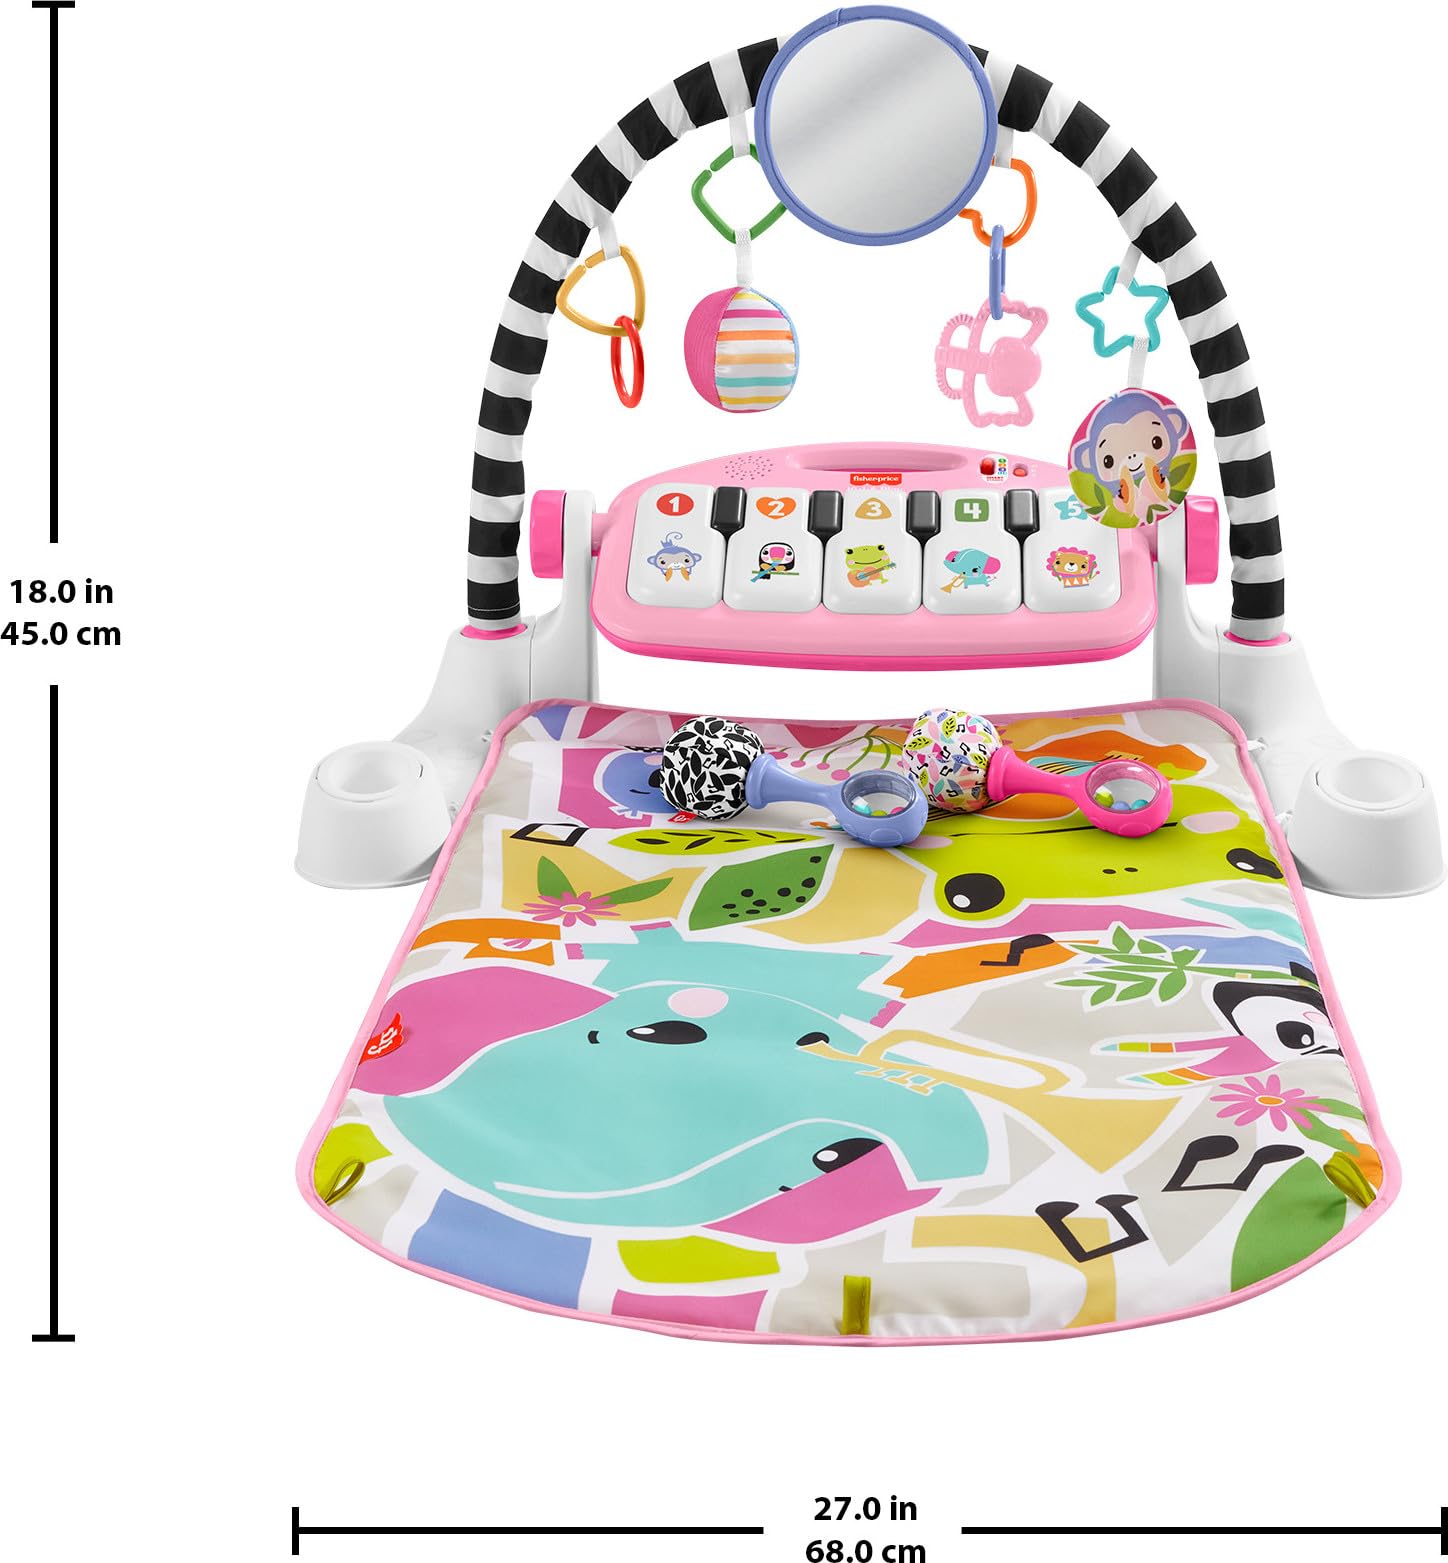 Fisher-Price Baby Gift Set Glow and Grow Kick & Play Piano Gym Baby Playmat & Musical Toy with Smart Stages Learning Content, Plus 2 Maracas for Ages 0+ Months, Pink